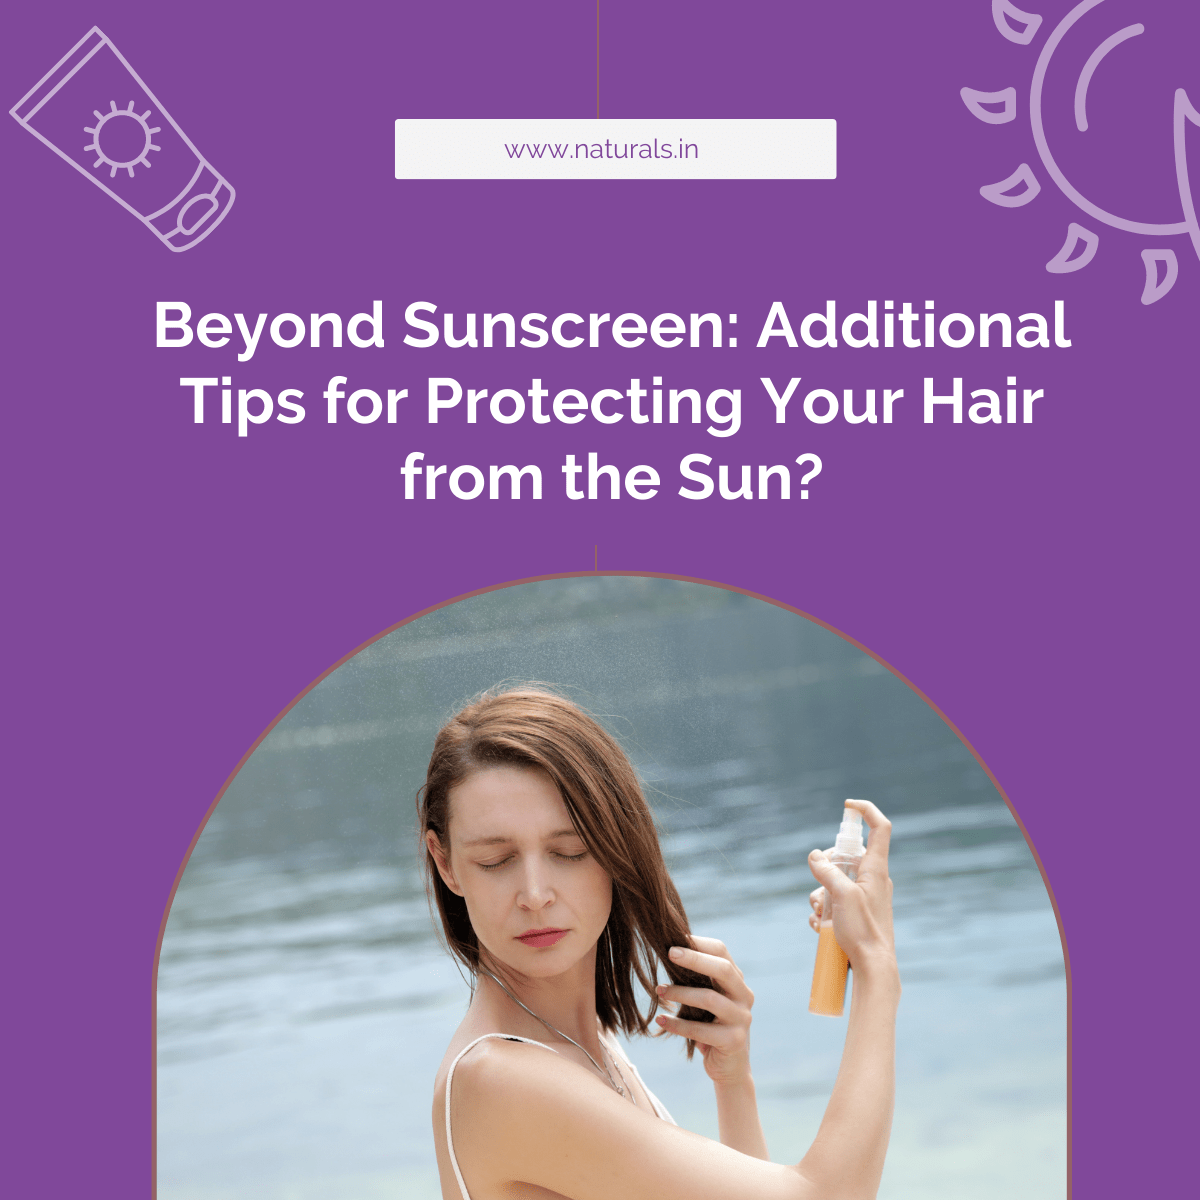 Tips for protecting your hair from the sun